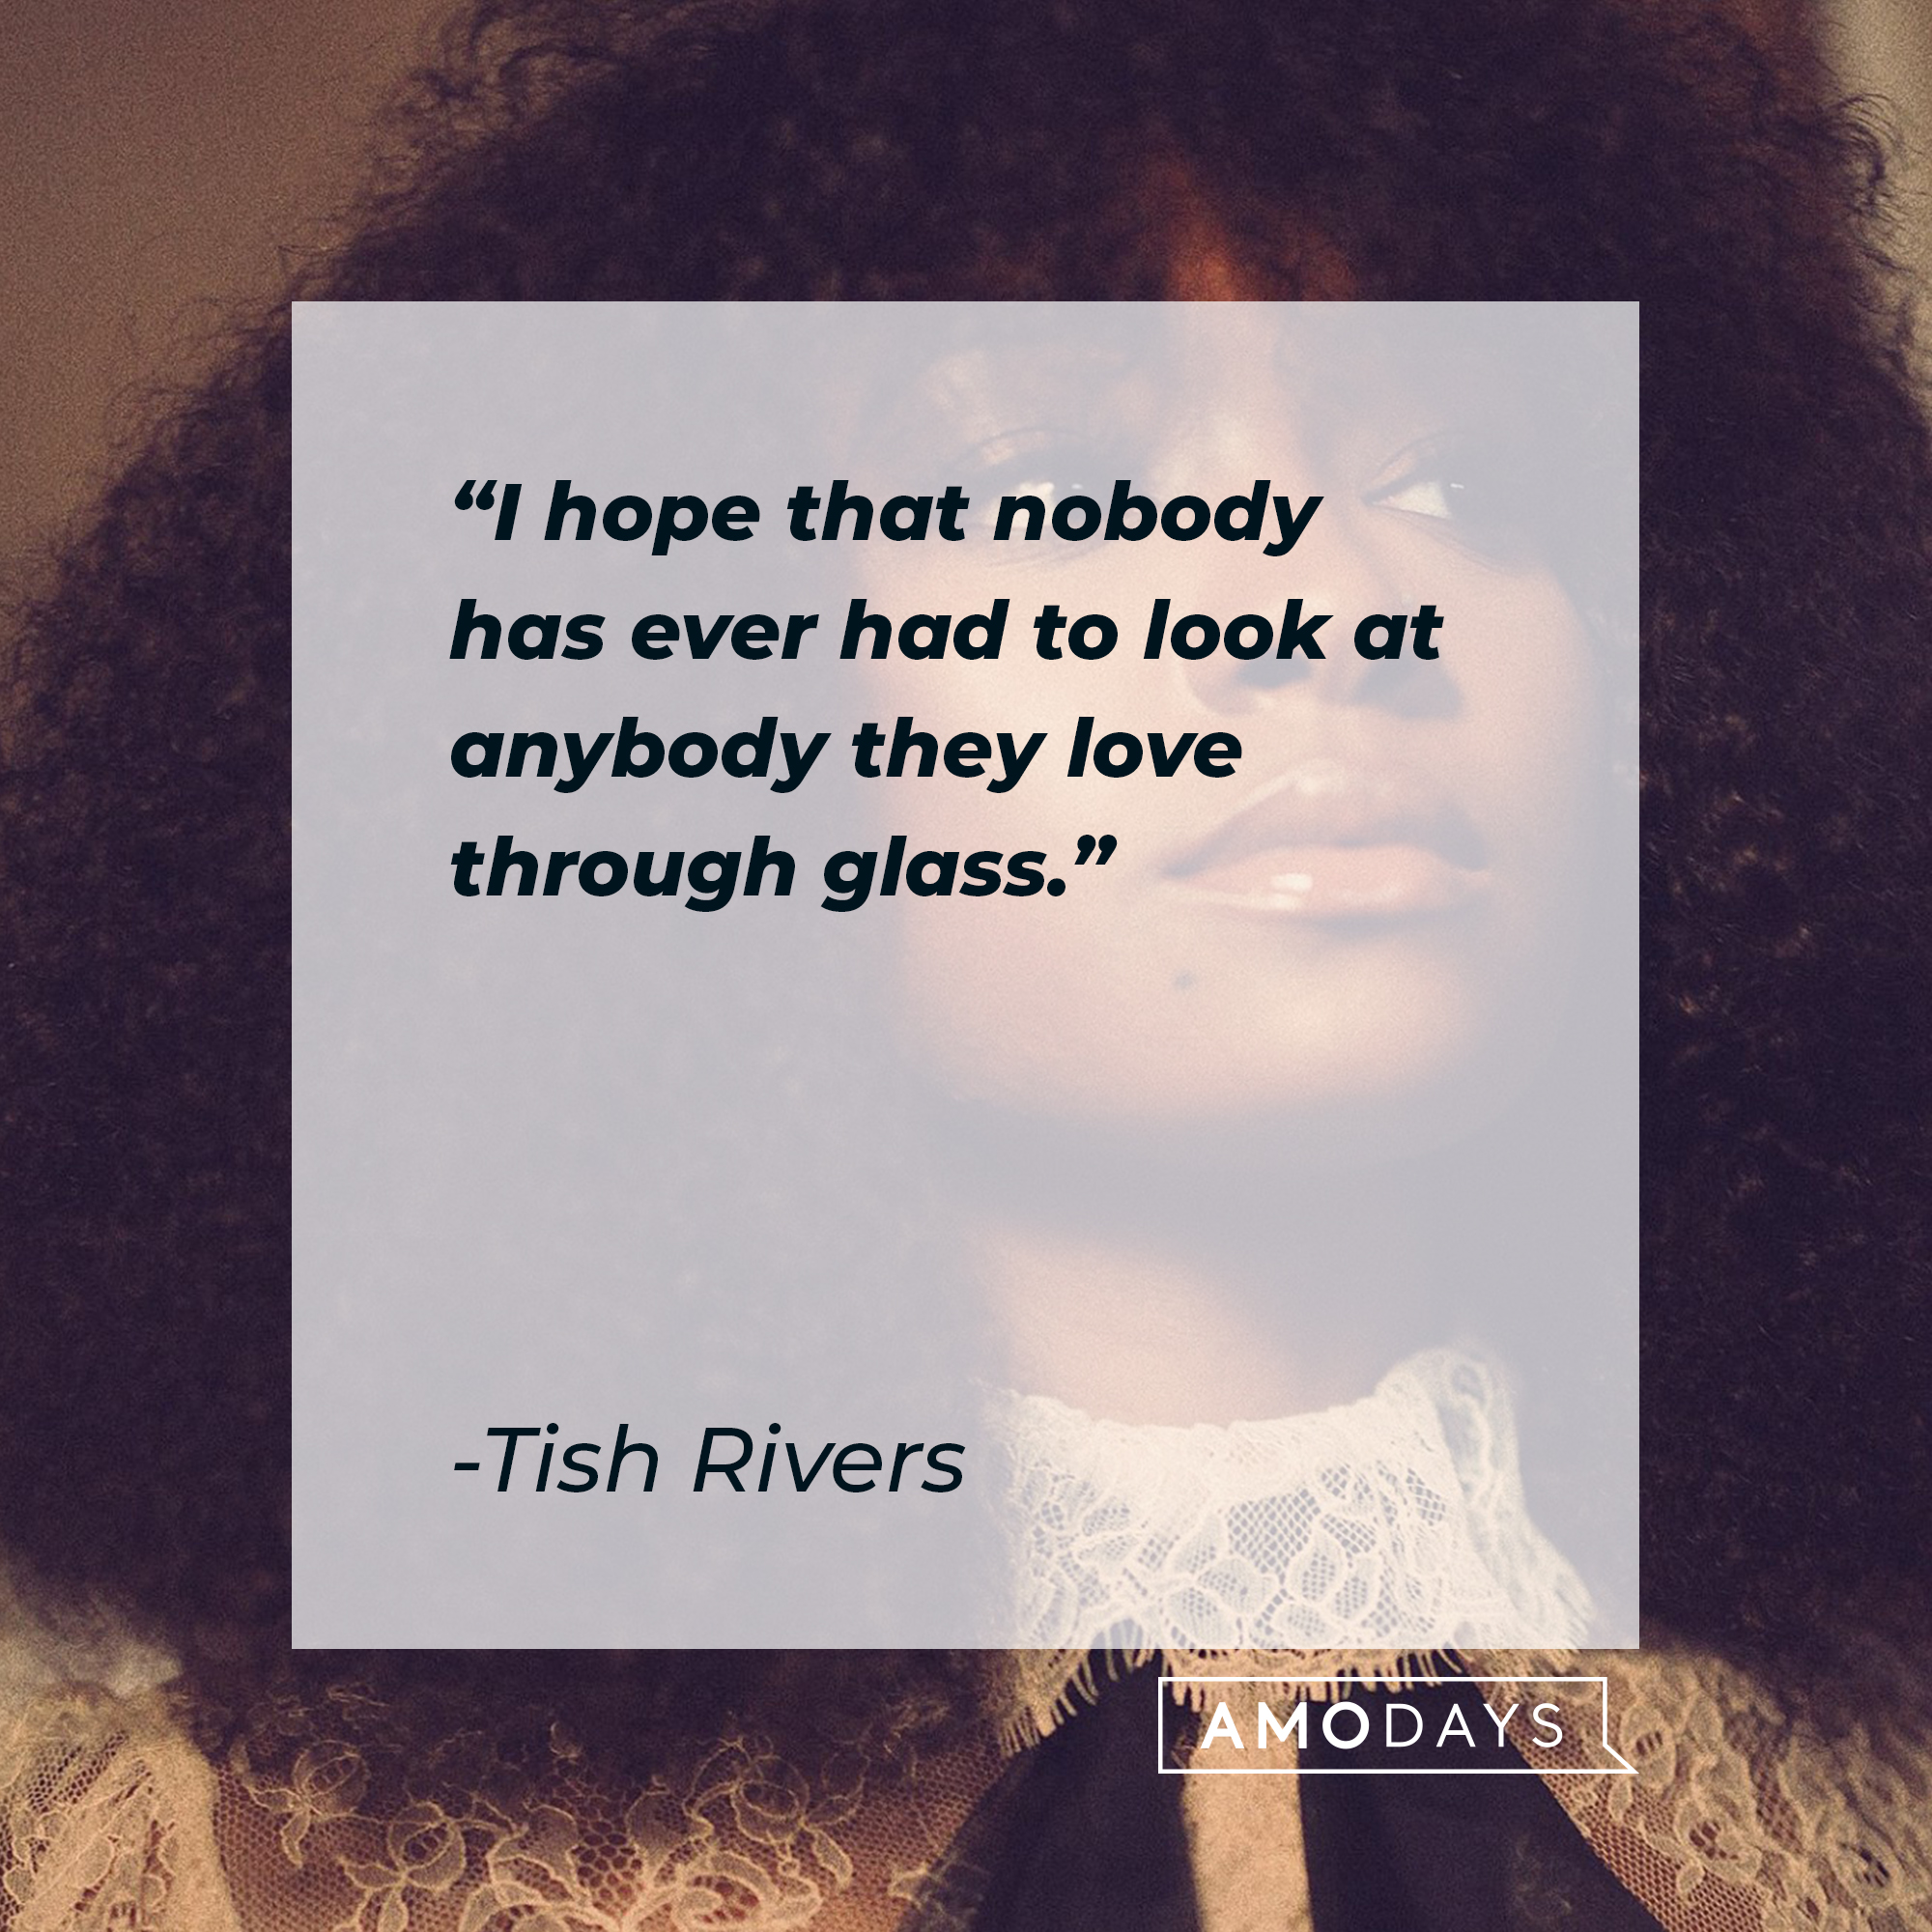 Tish Rivers quote: “I hope that nobody has ever had to look at anybody they love through glass.” | Source: facebook.com/BealeStreet